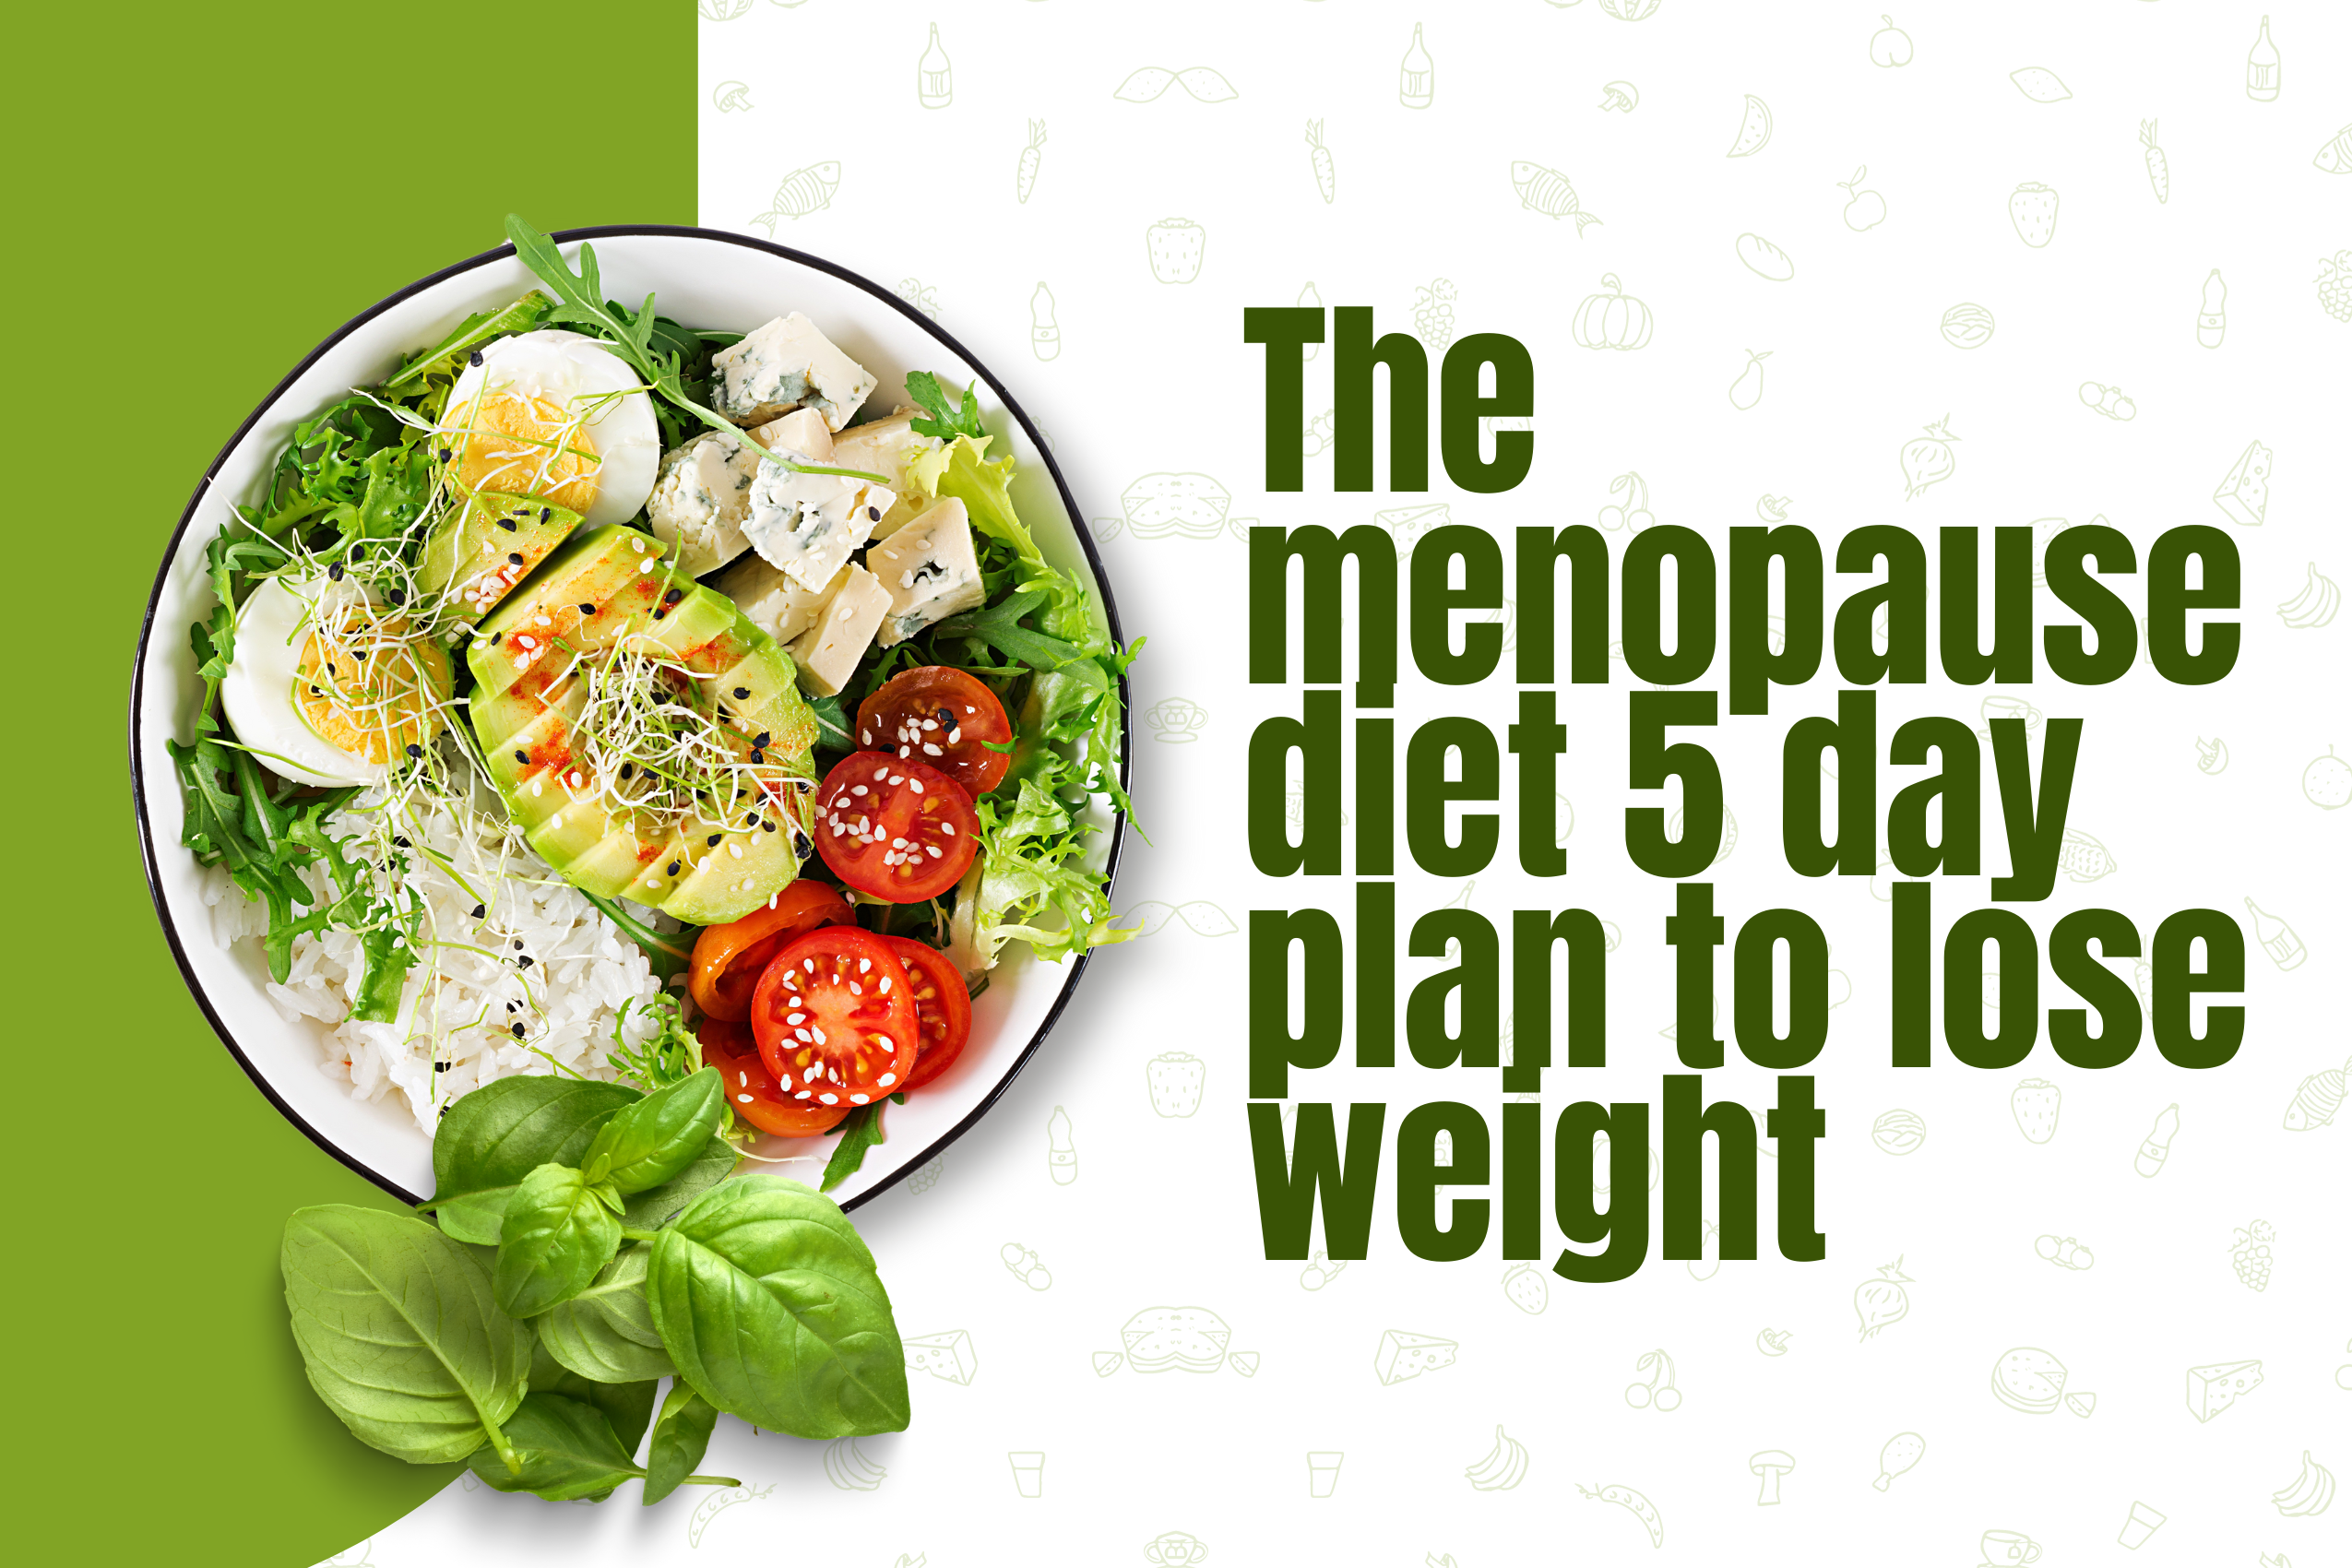 You are currently viewing The menopause diet 5 day plan to lose weight